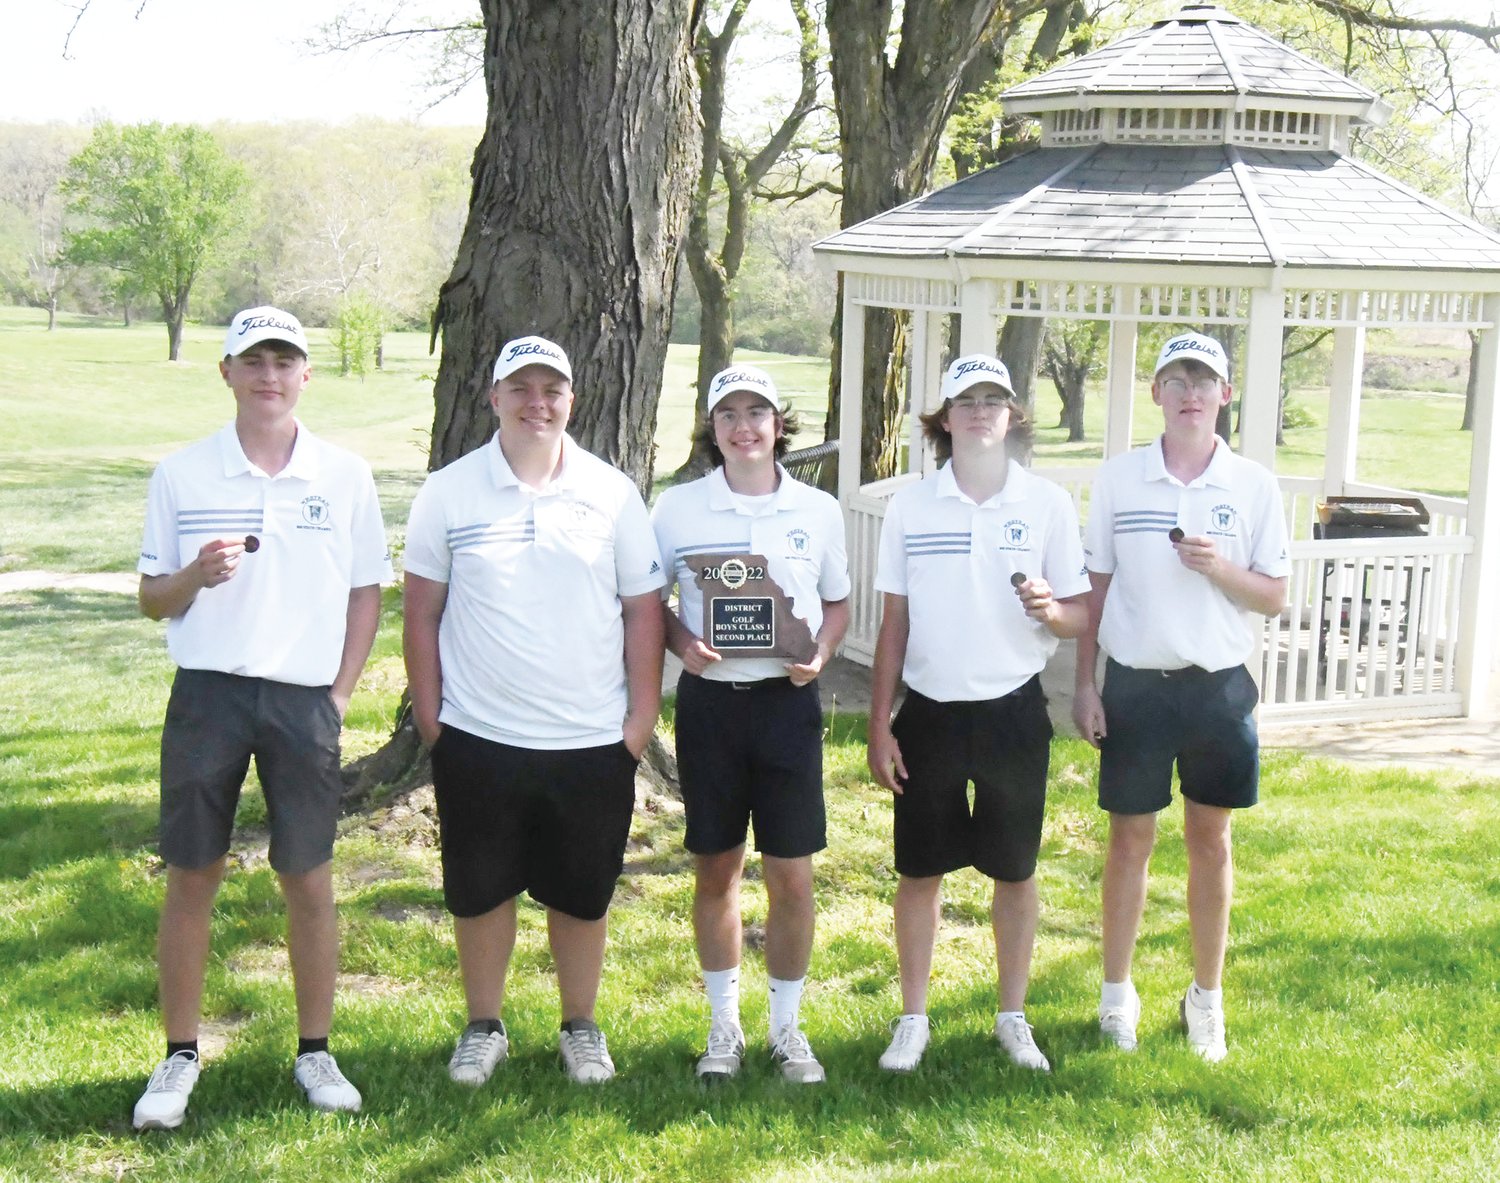 The Westran High School boys’ golf team gathers for a group photo after taking second overall at the Class 1 District 2 Tournament Monday at Heritage Hills Golf Club in Moberly. The team consists of (from left), Colin Brandow, Aiden Brockleman, Logan Brown, Logan Bain and Christian Seiders.